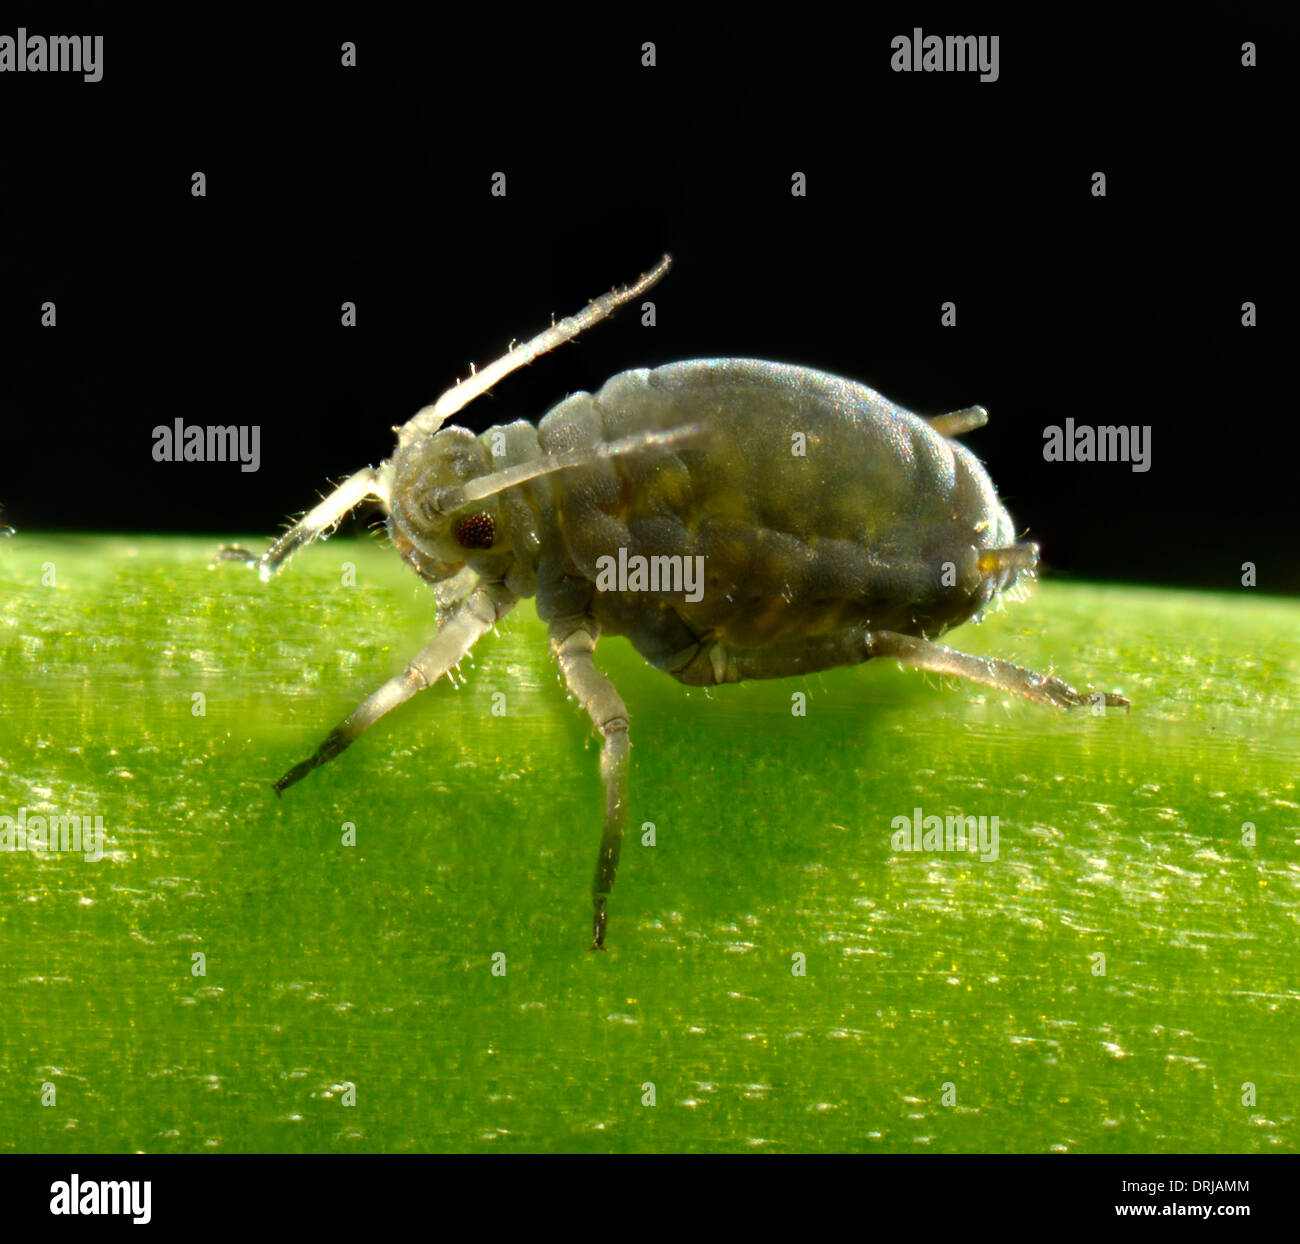 adult black bean louse (Aphis fabae), tube aphid (Aphidoidea), extreme macroadmission, adulte schwarze Bohnenlaus (Aphis fabae), Stock Photo